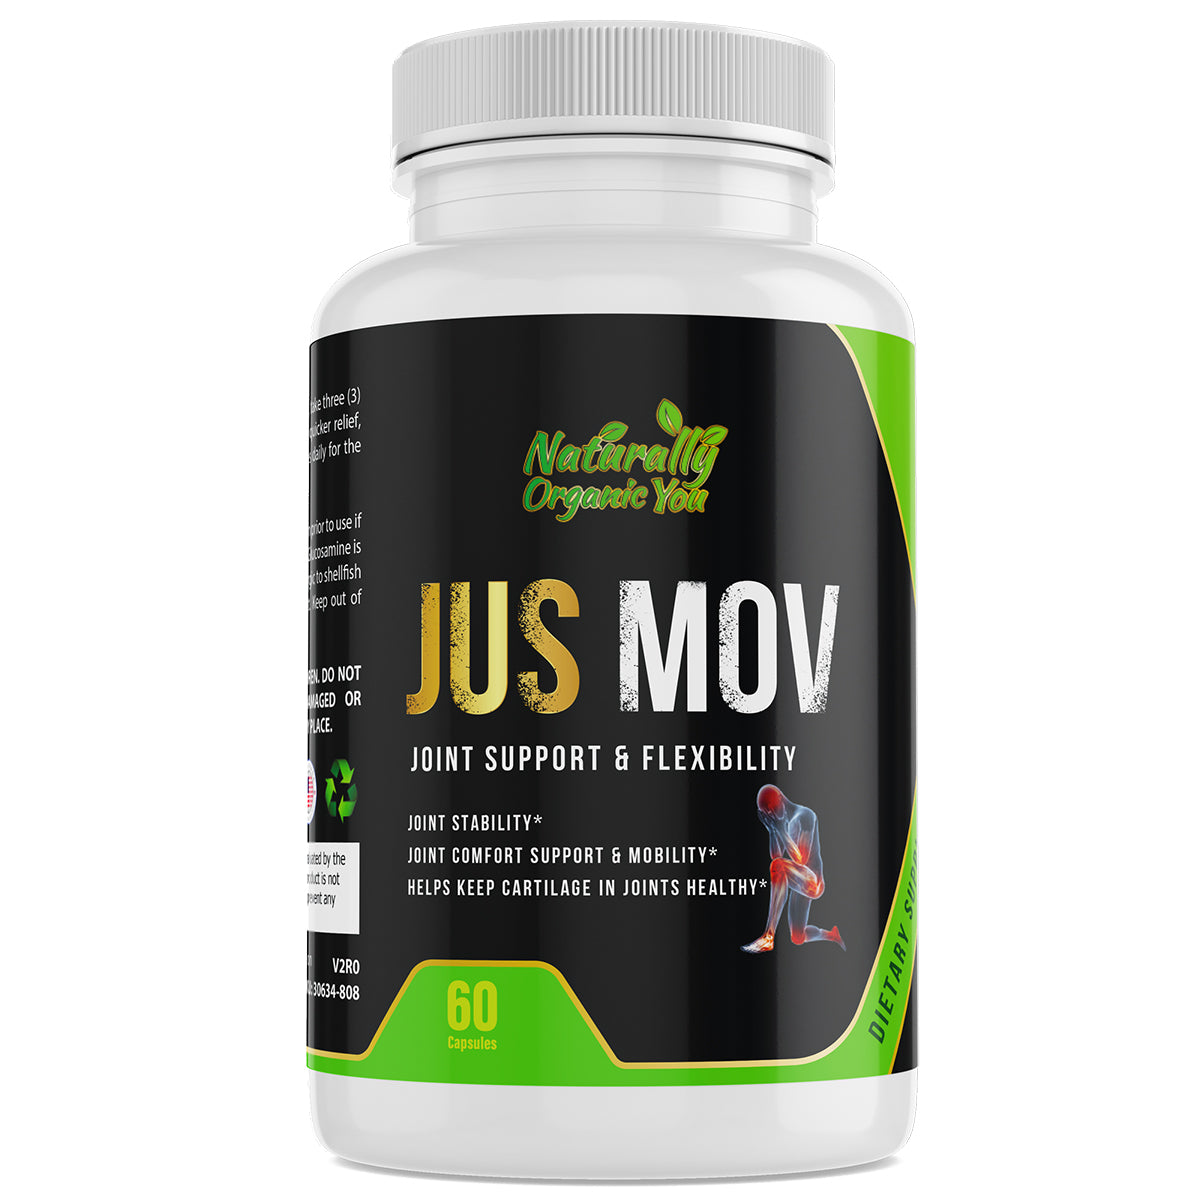 JUS MOV (Joint Support & Flexibility)